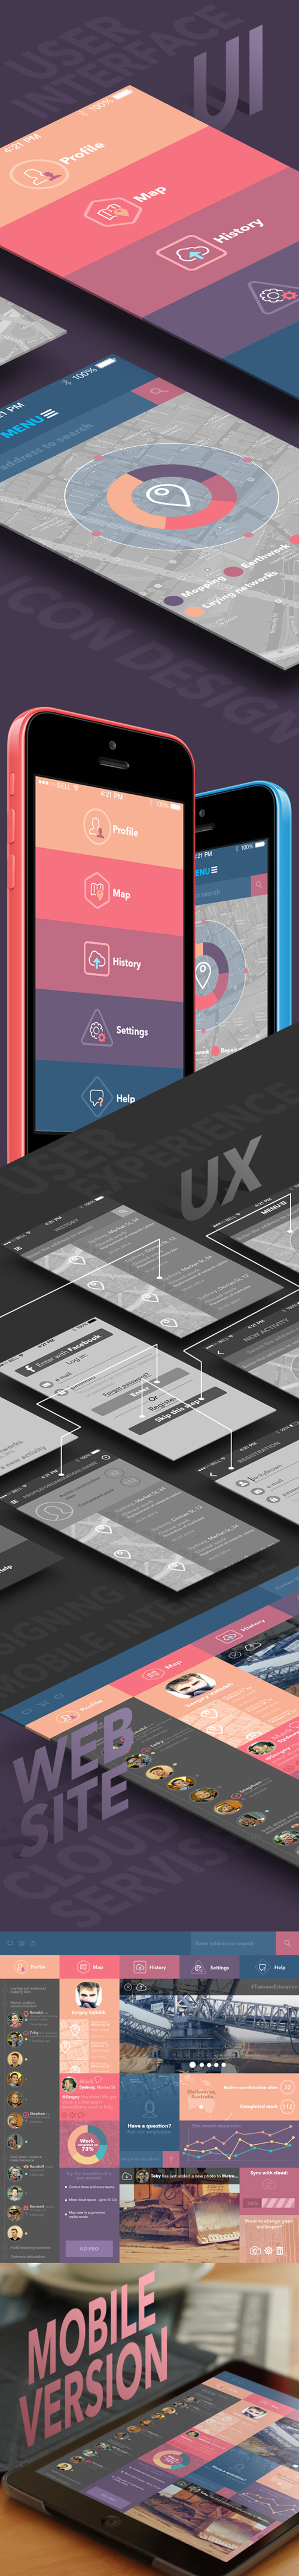 Amazing Mobile App UI Designs with Ultimate User Experience - 11